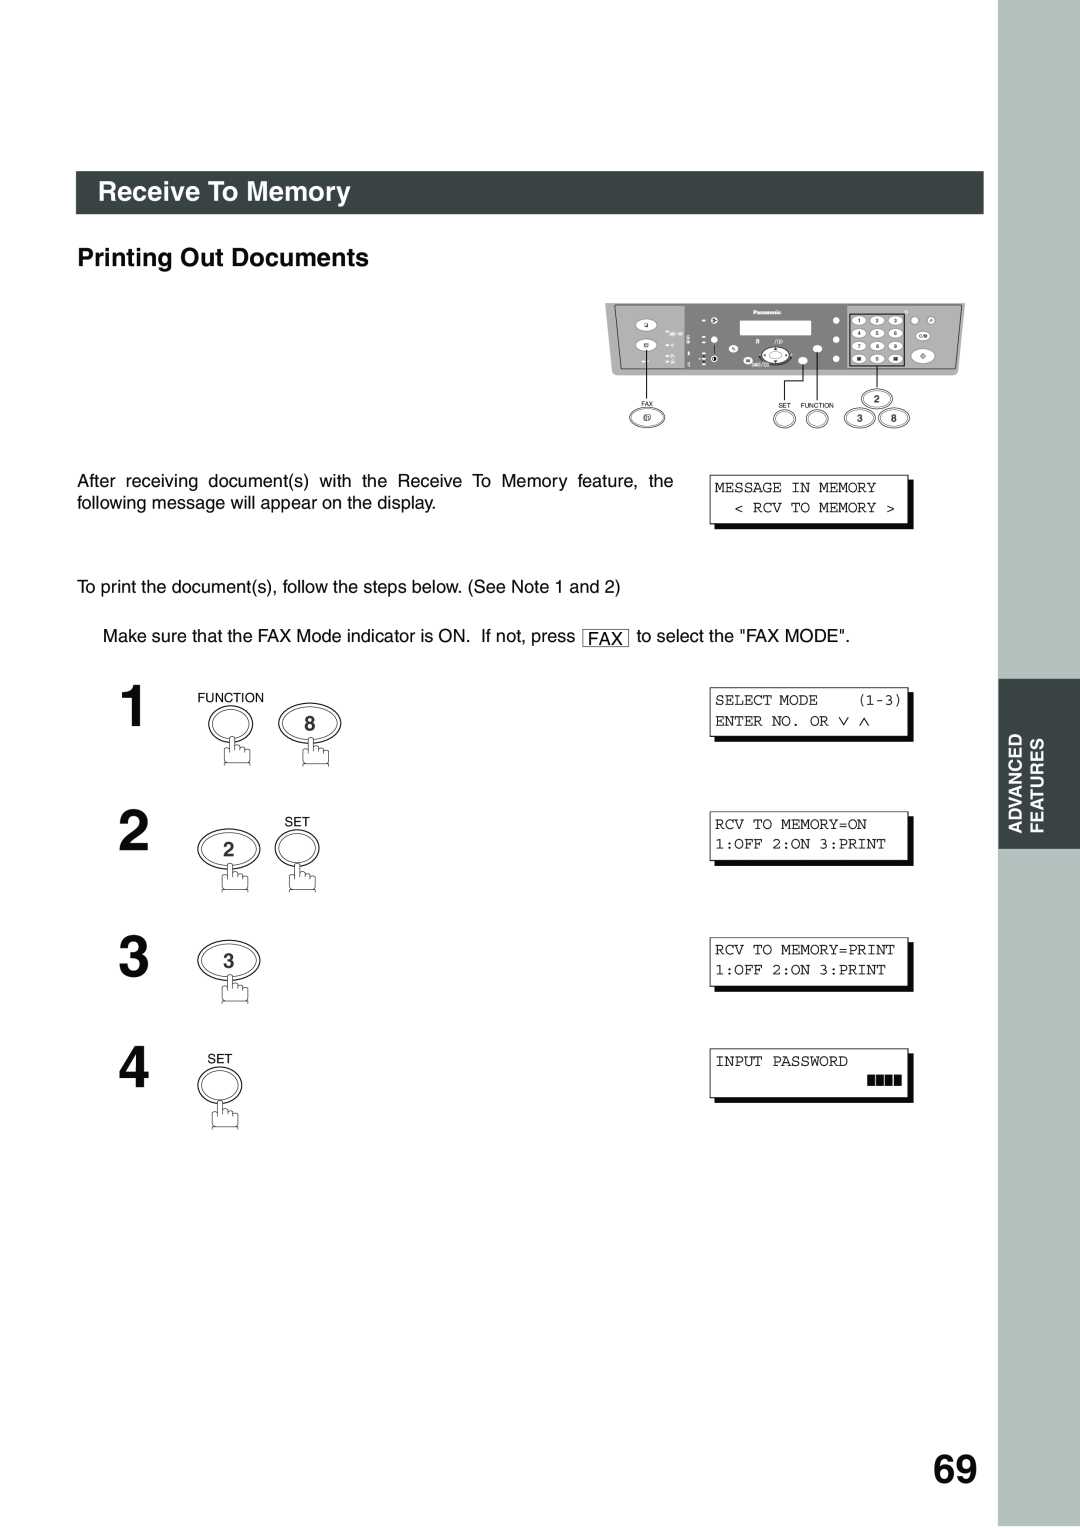 Panasonic DP-135FP appendix Printing Out Documents, Receive To Memory, Function 